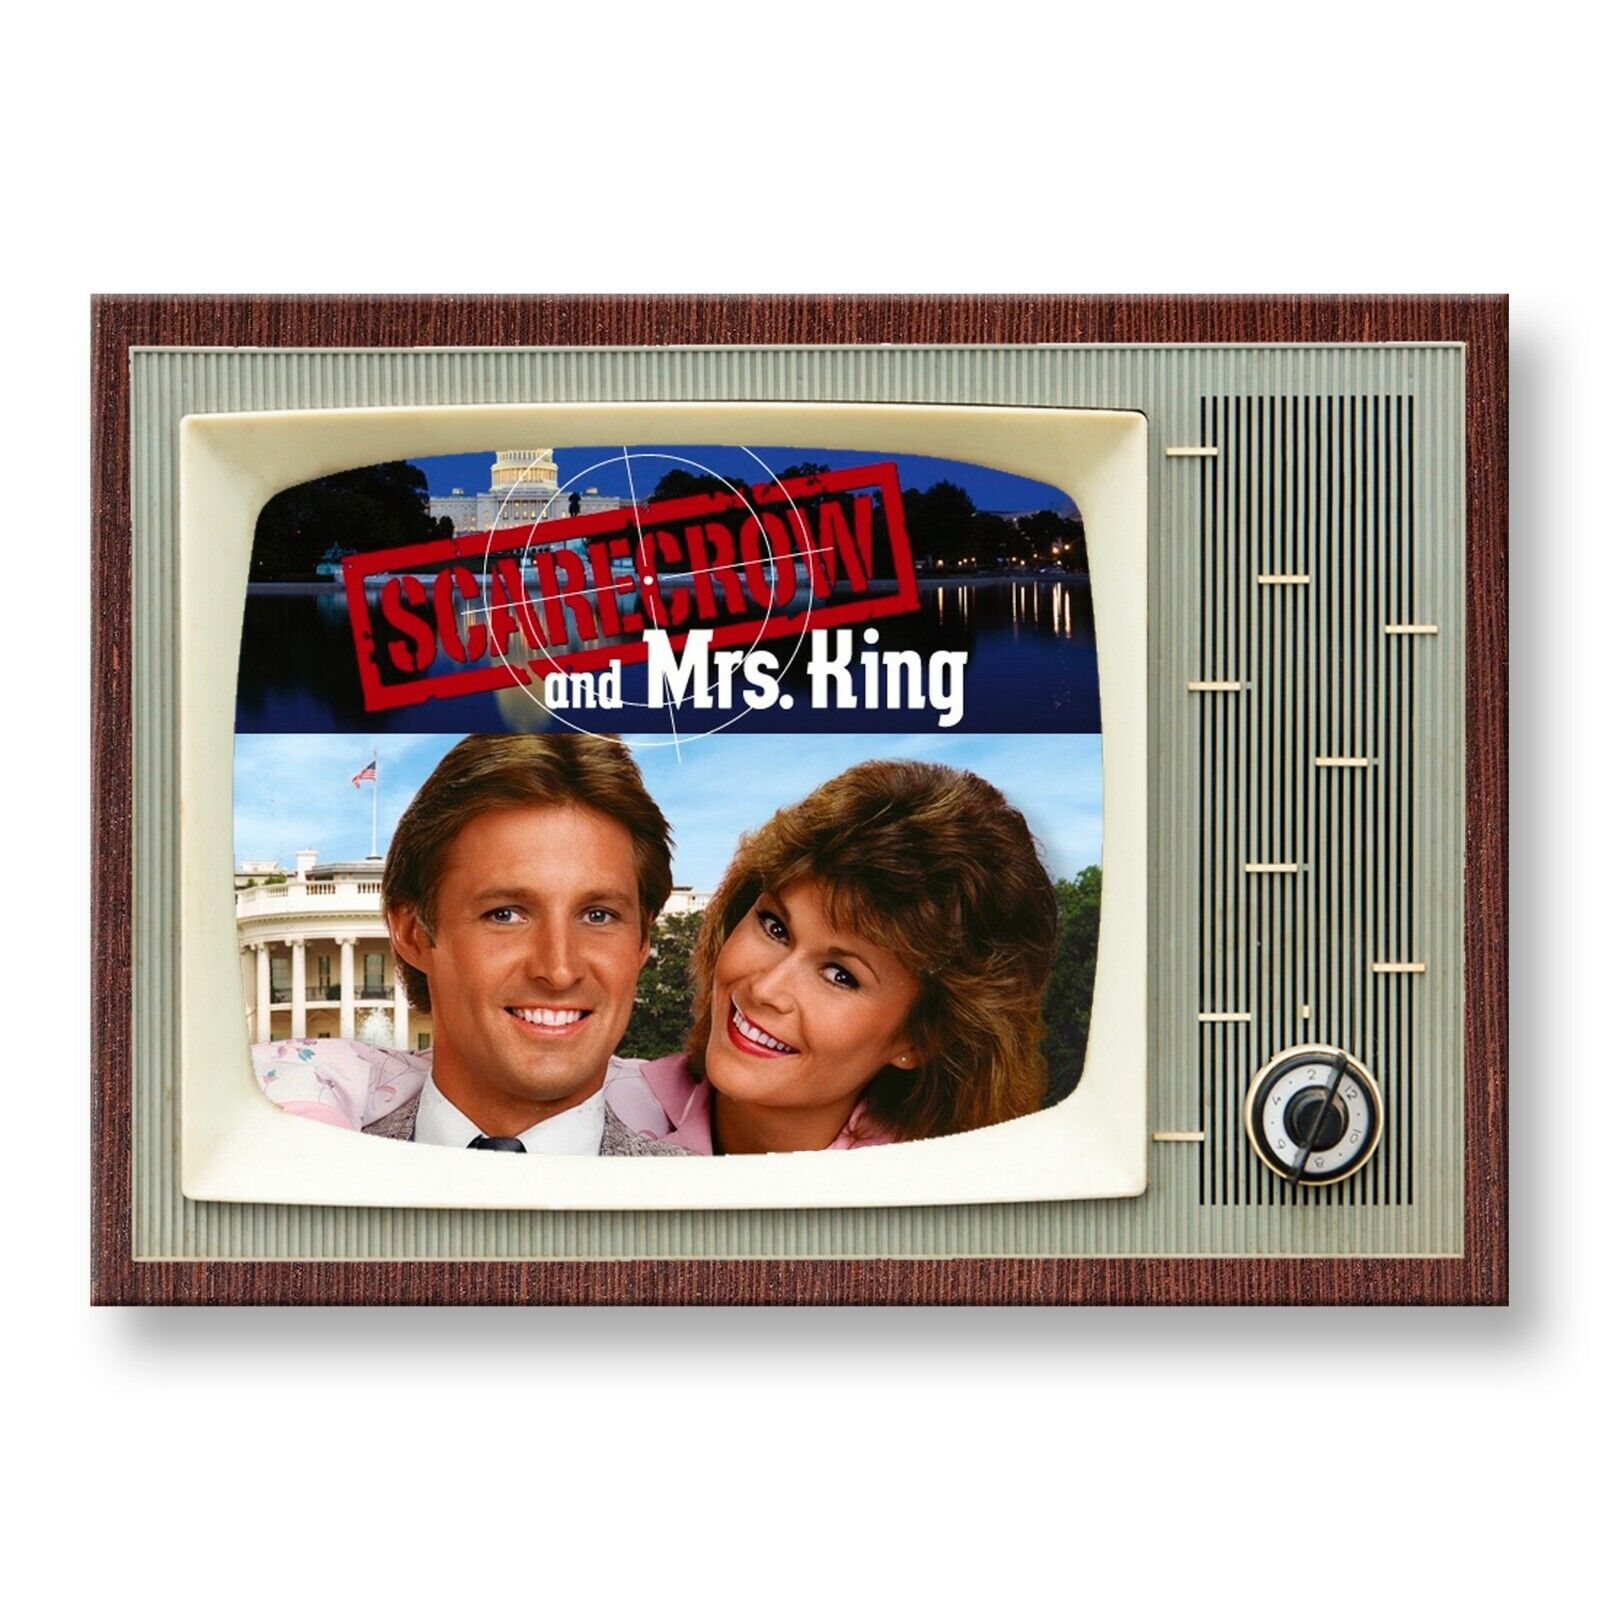 SCARECROW AND MRS KING TV Show TV 3.5 inches x 2.5 inches Steel FRIDGE MAGNET